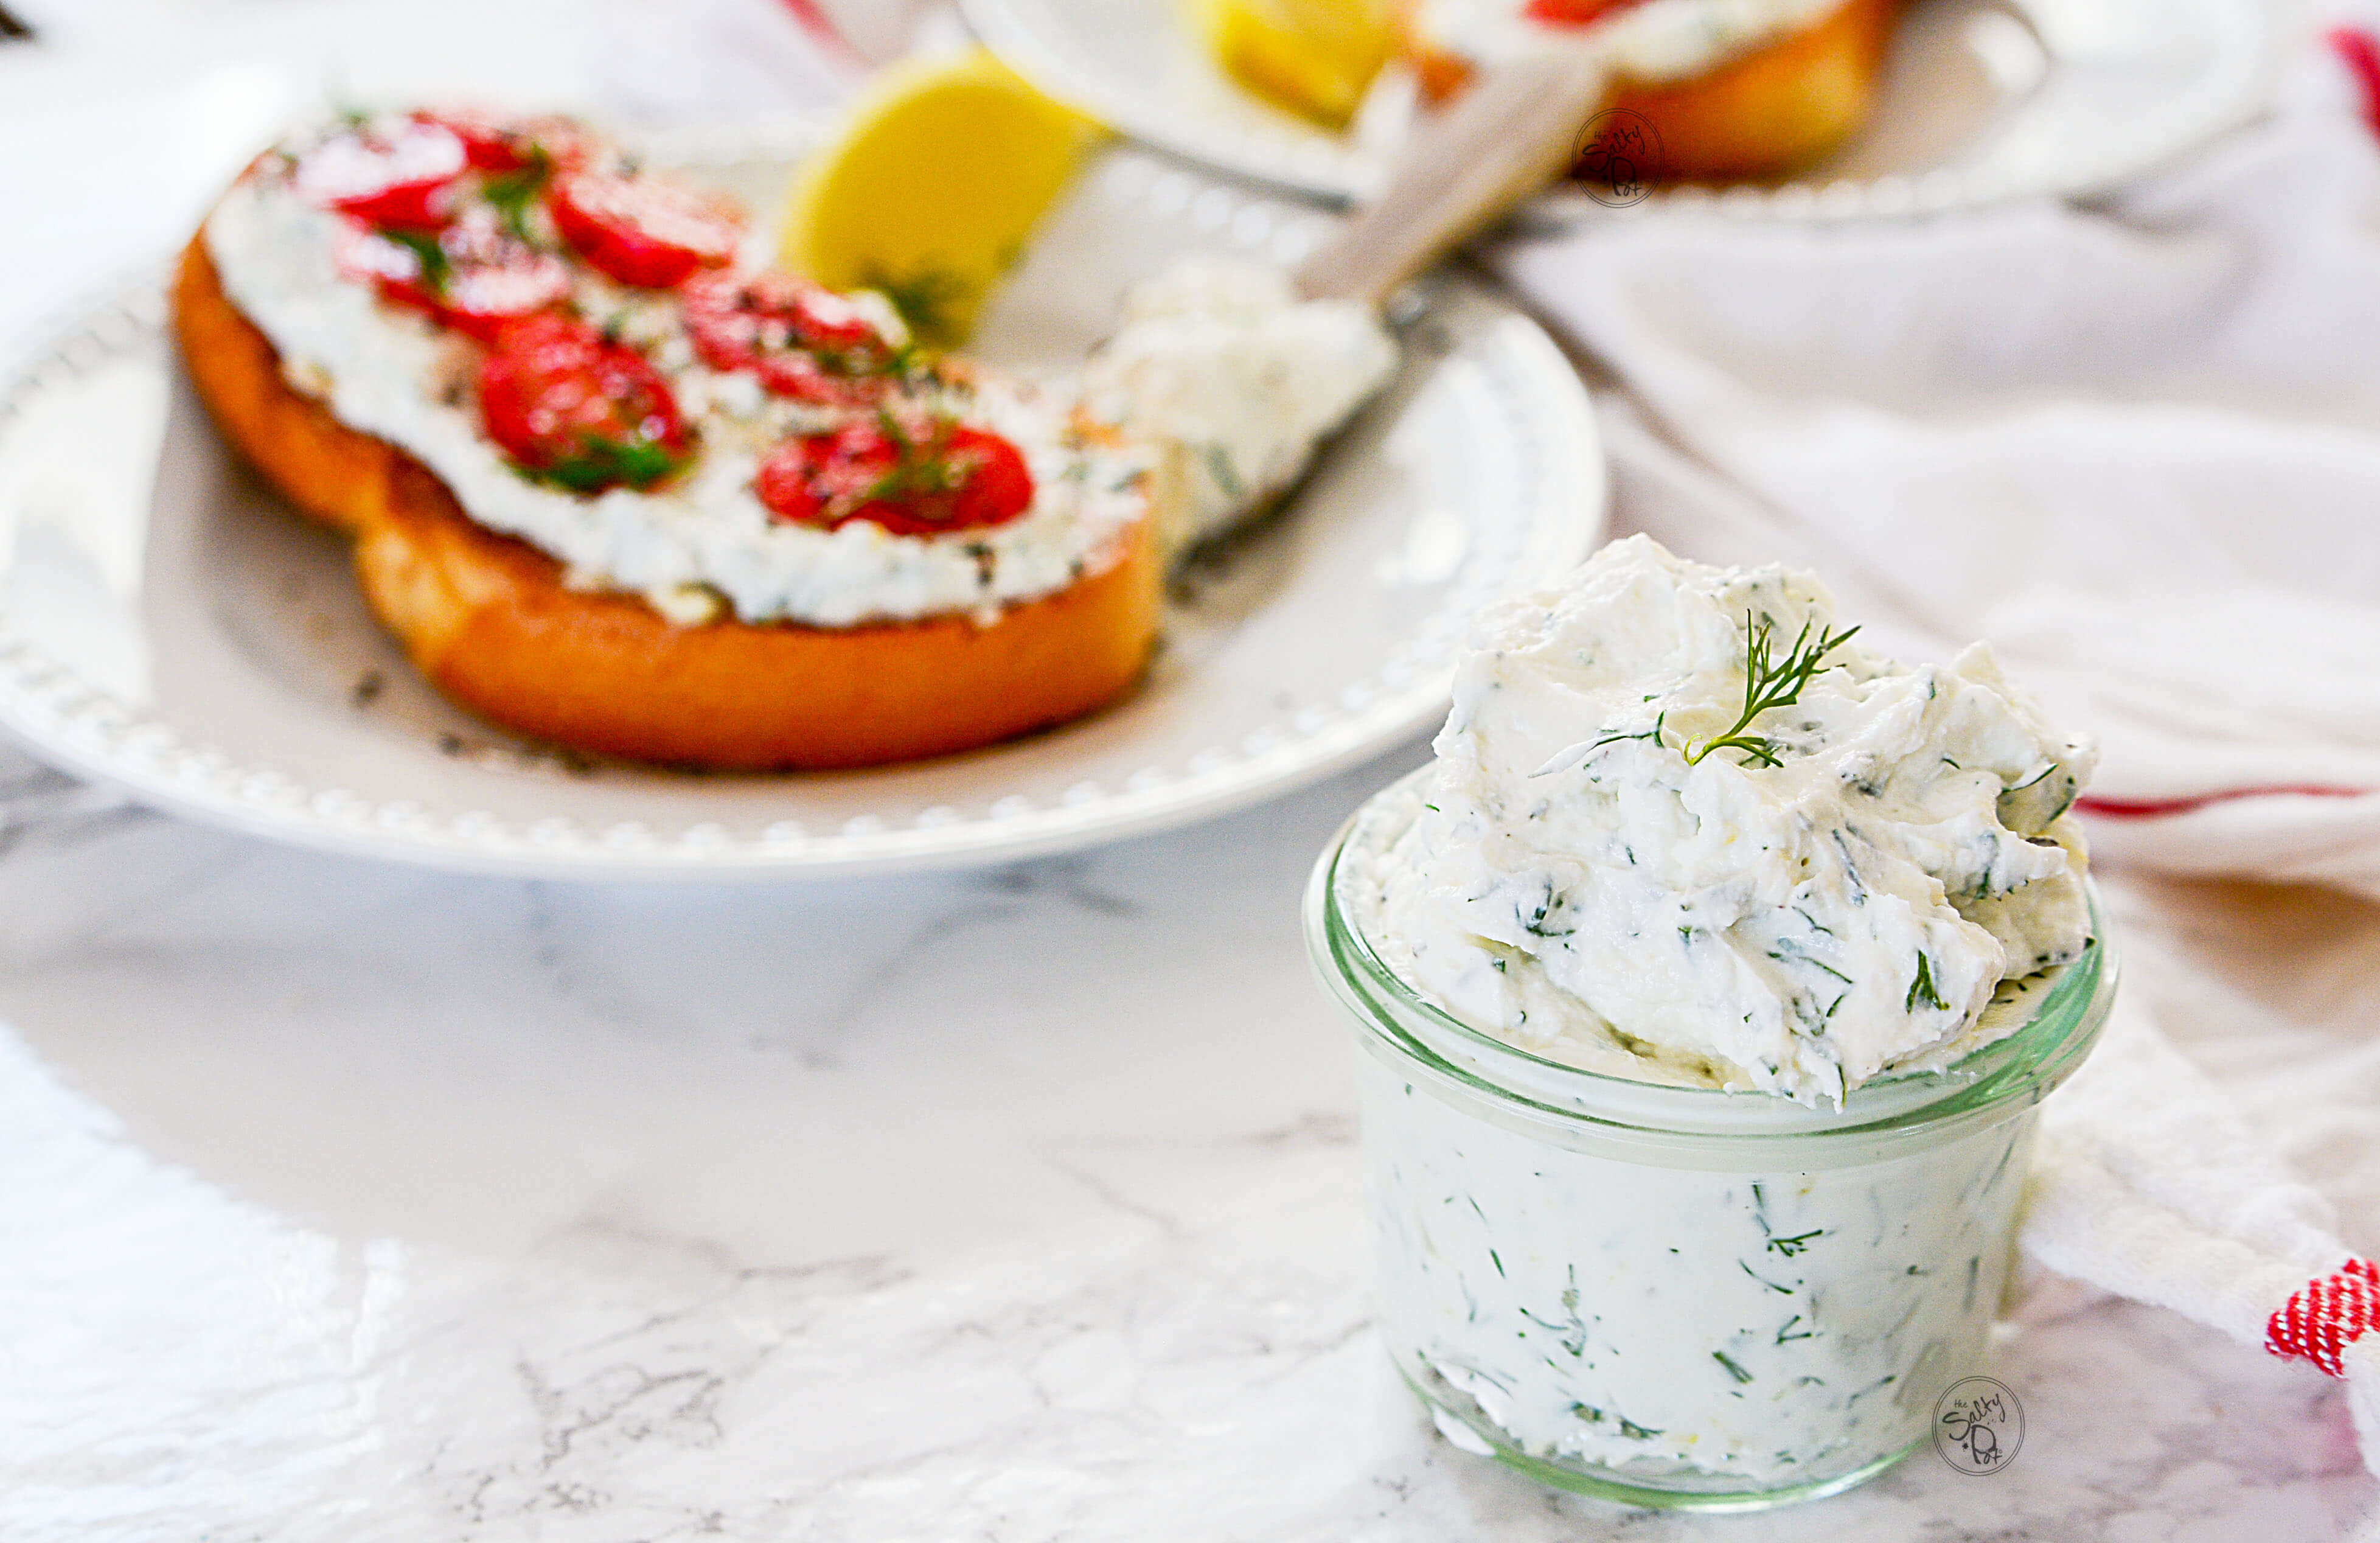 This Lemon Dill Yogurt Cheese is creamy and spreadable! It's PERFECT on your morning toast! Check out the quick recipe here! - The Salty Pot